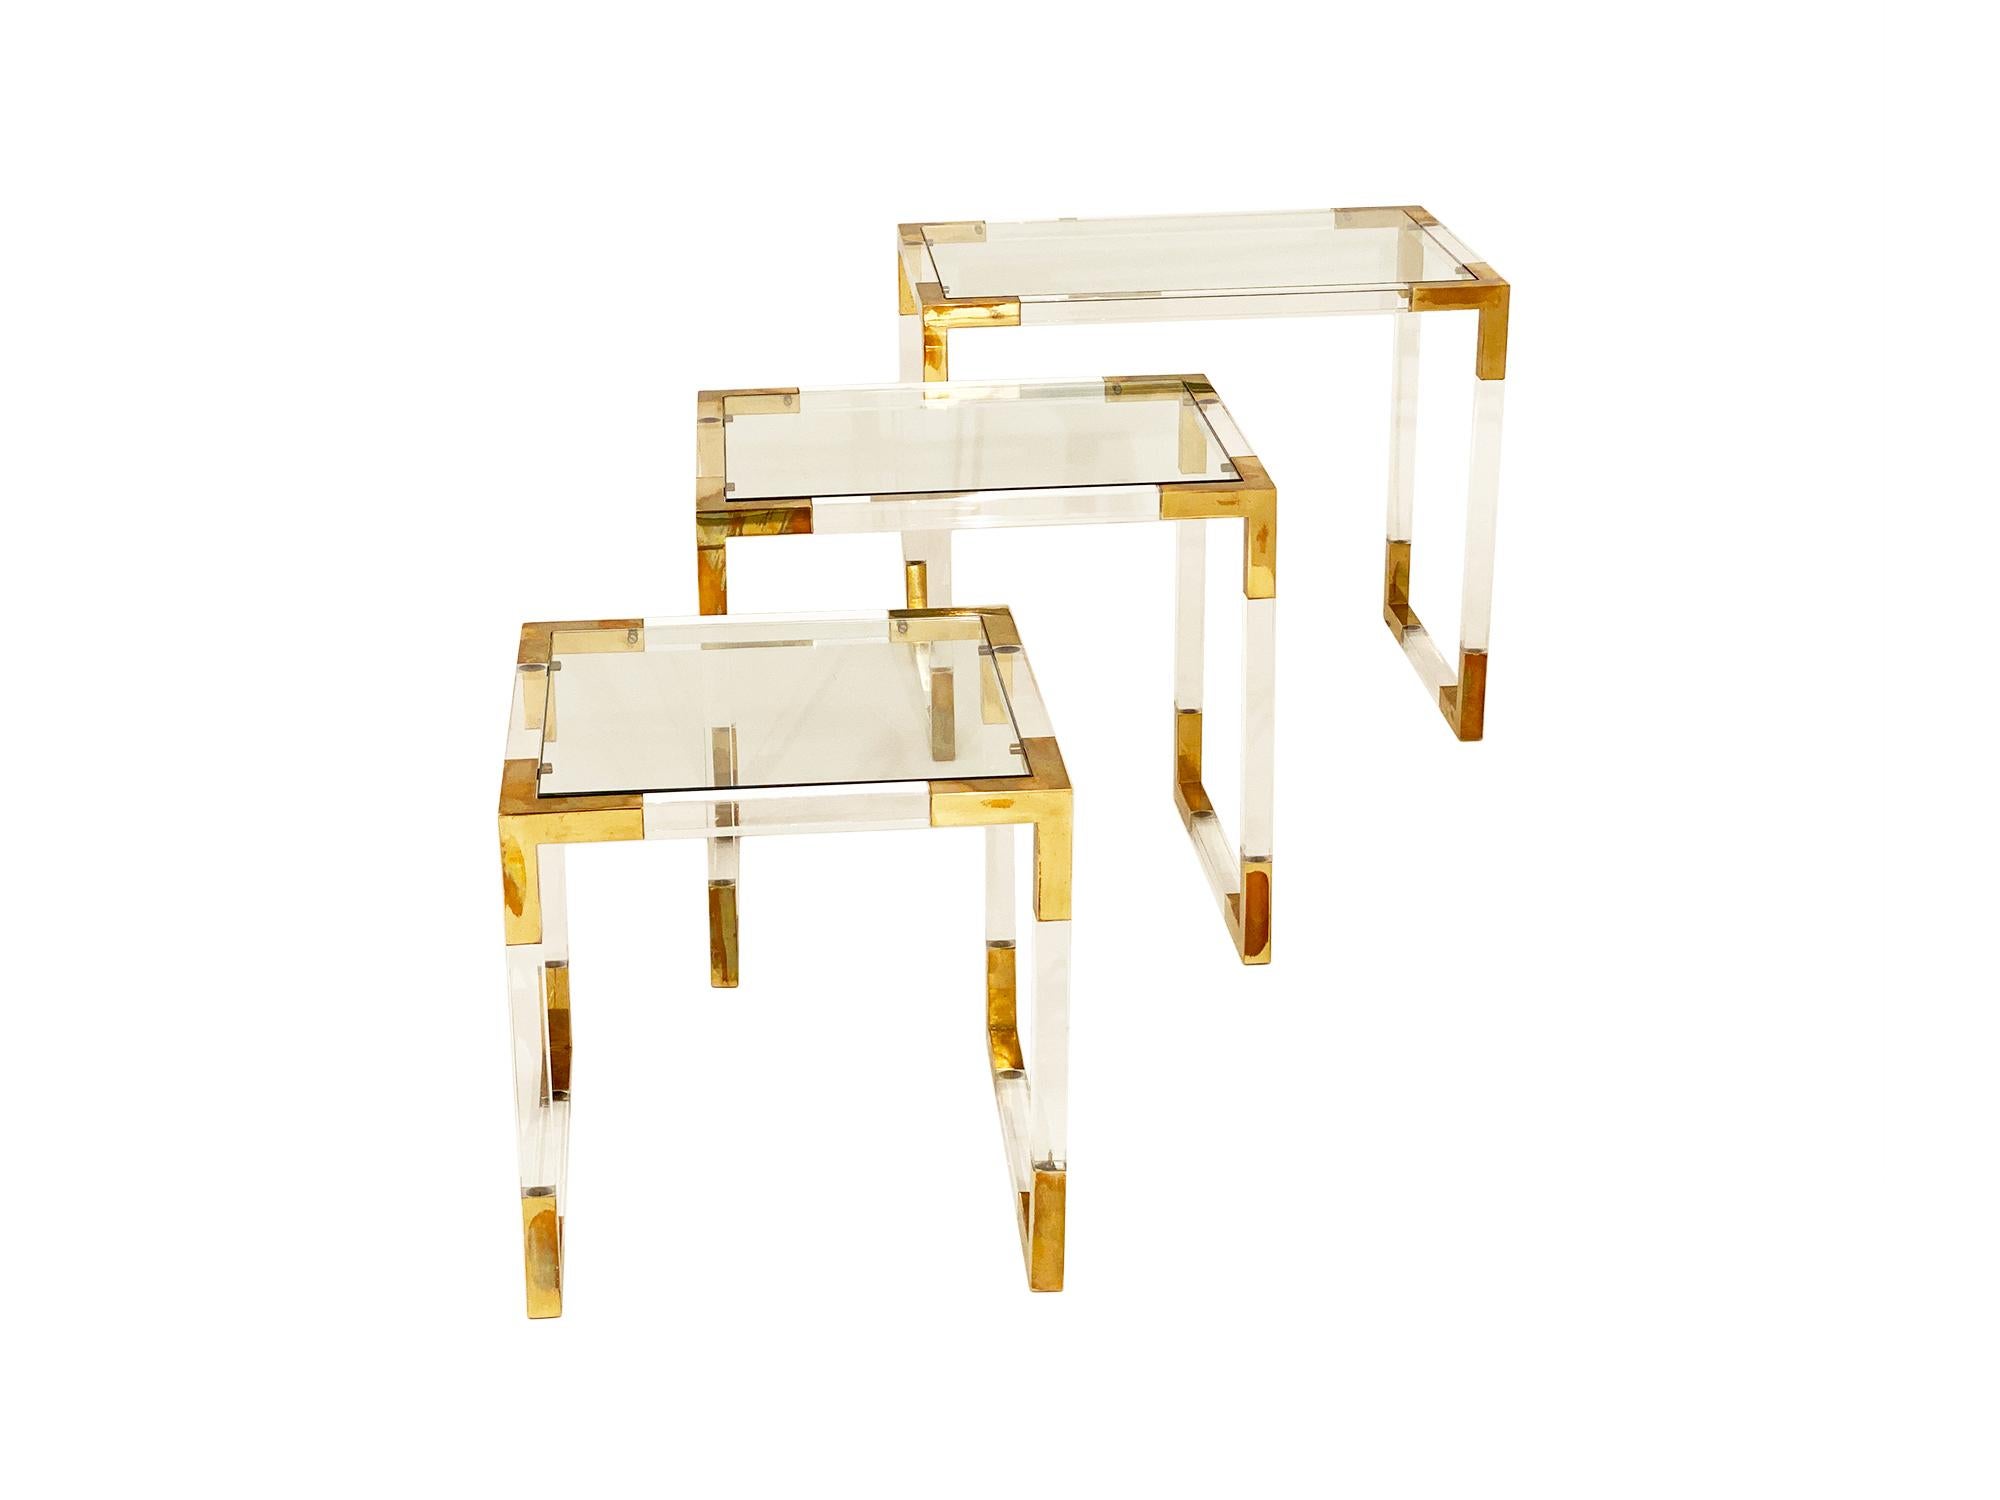 Brass and Lucite vintage nesting tables from France. Each table has a clear glass shelf and sits within the Lucite and brass structure. The measurements are for the largest table.